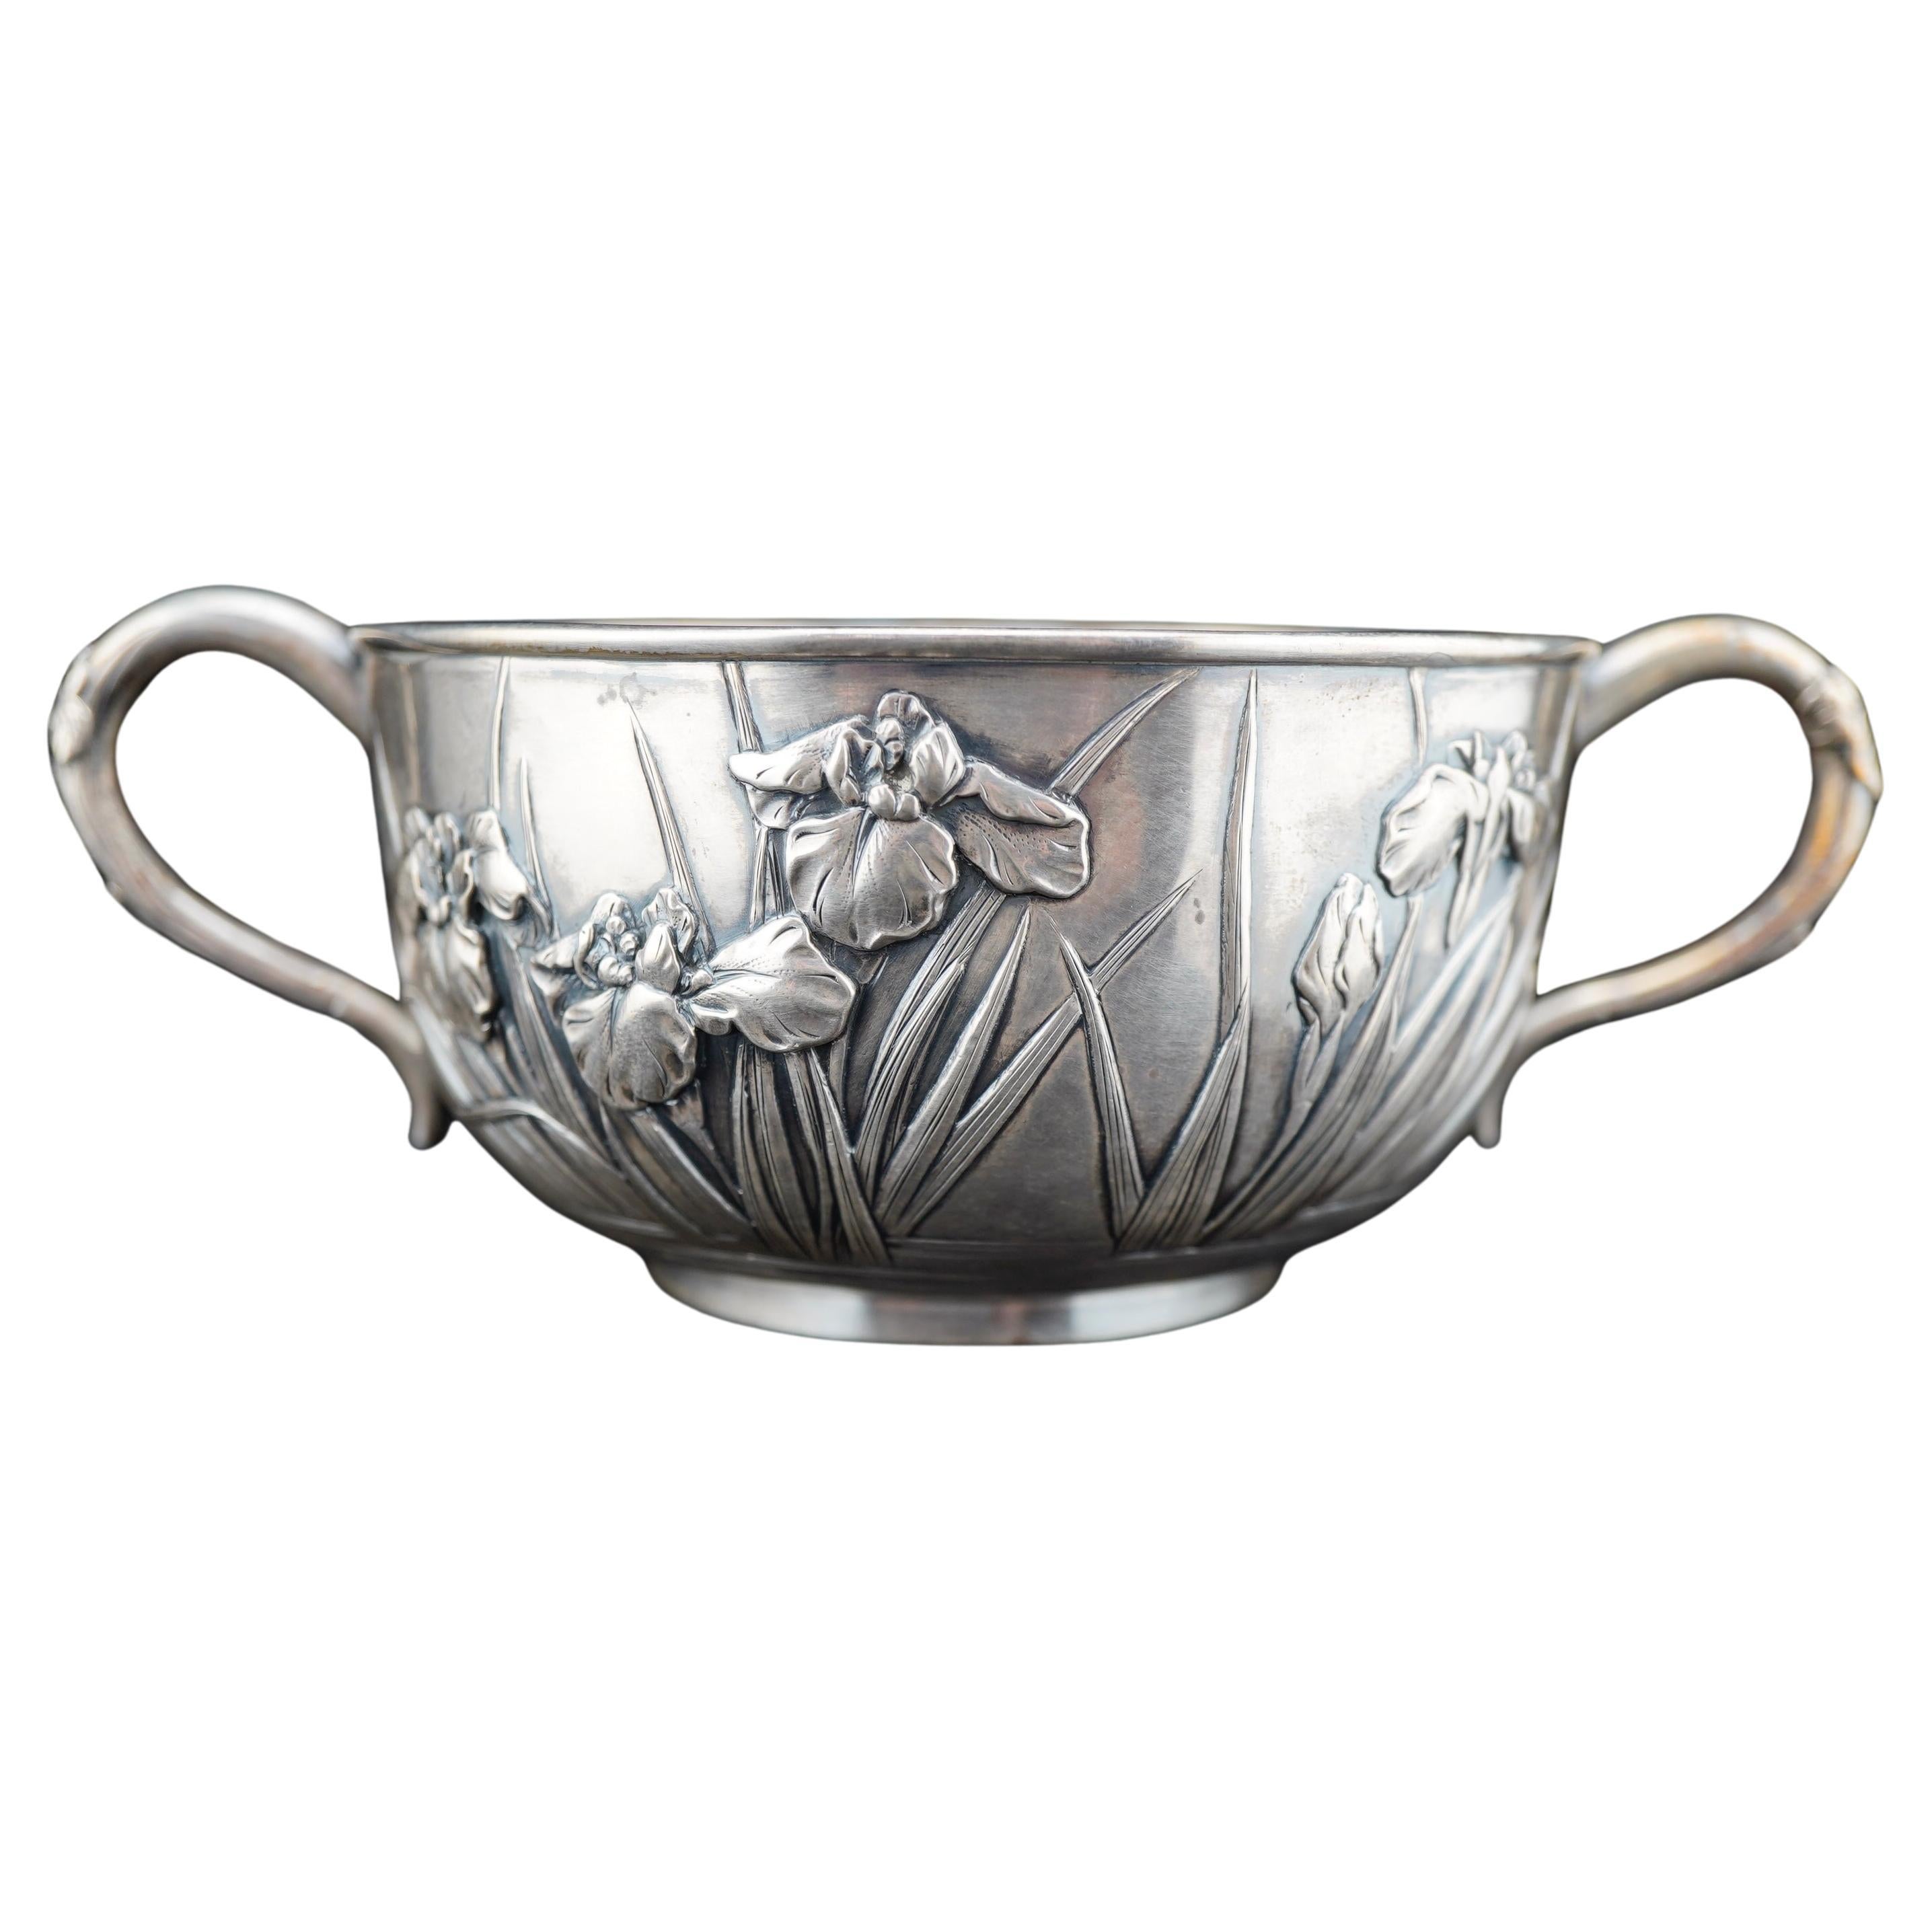 Japanese Silver Bowl with Irises by Konoike, Meji Period For Sale